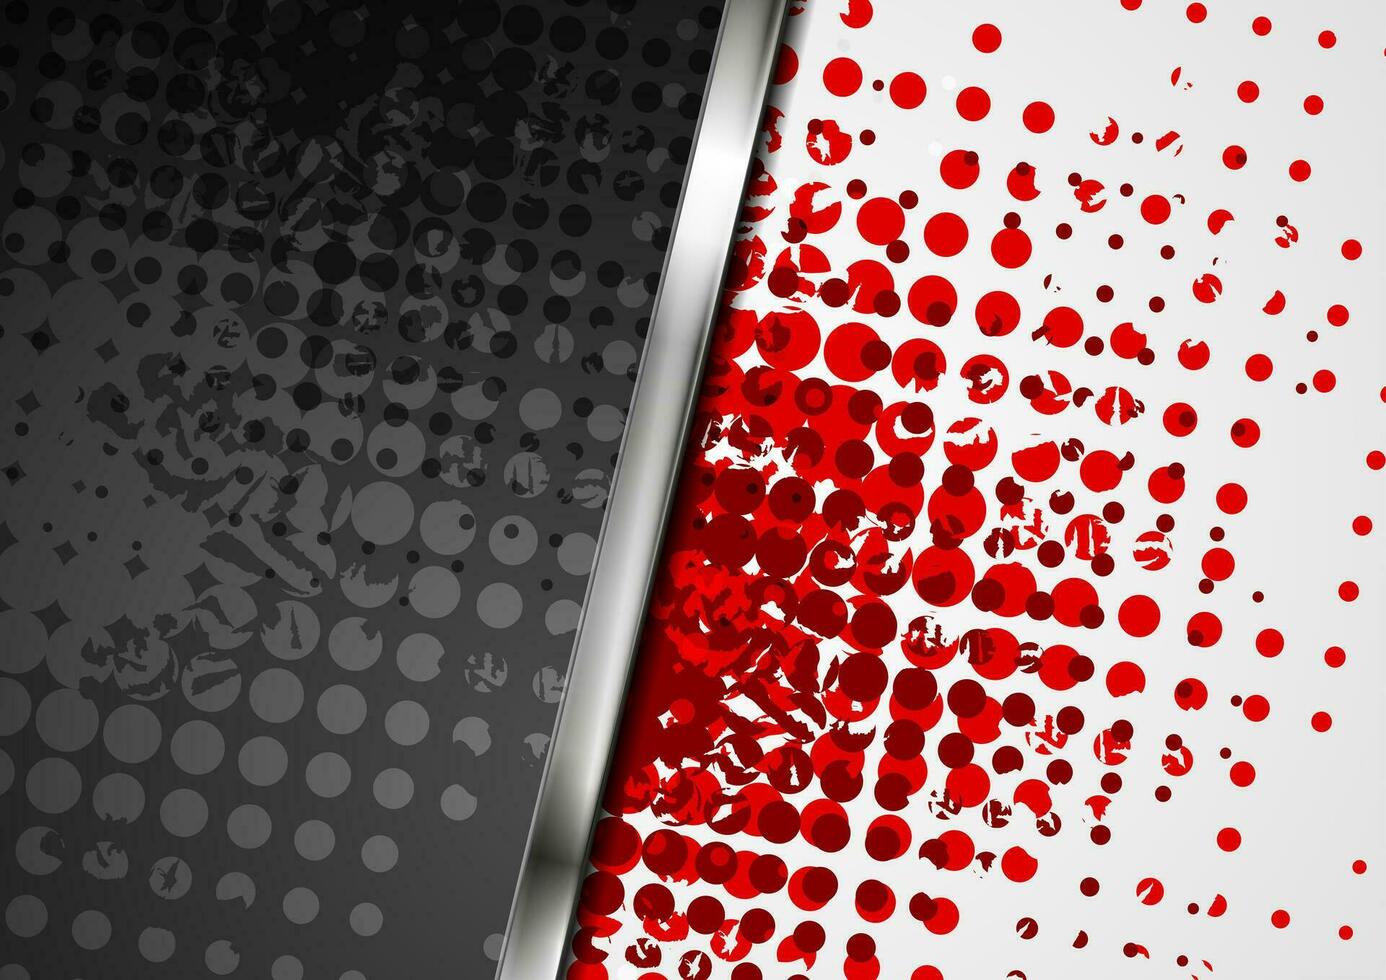 Red black abstract grunge tech background with halftone blots vector